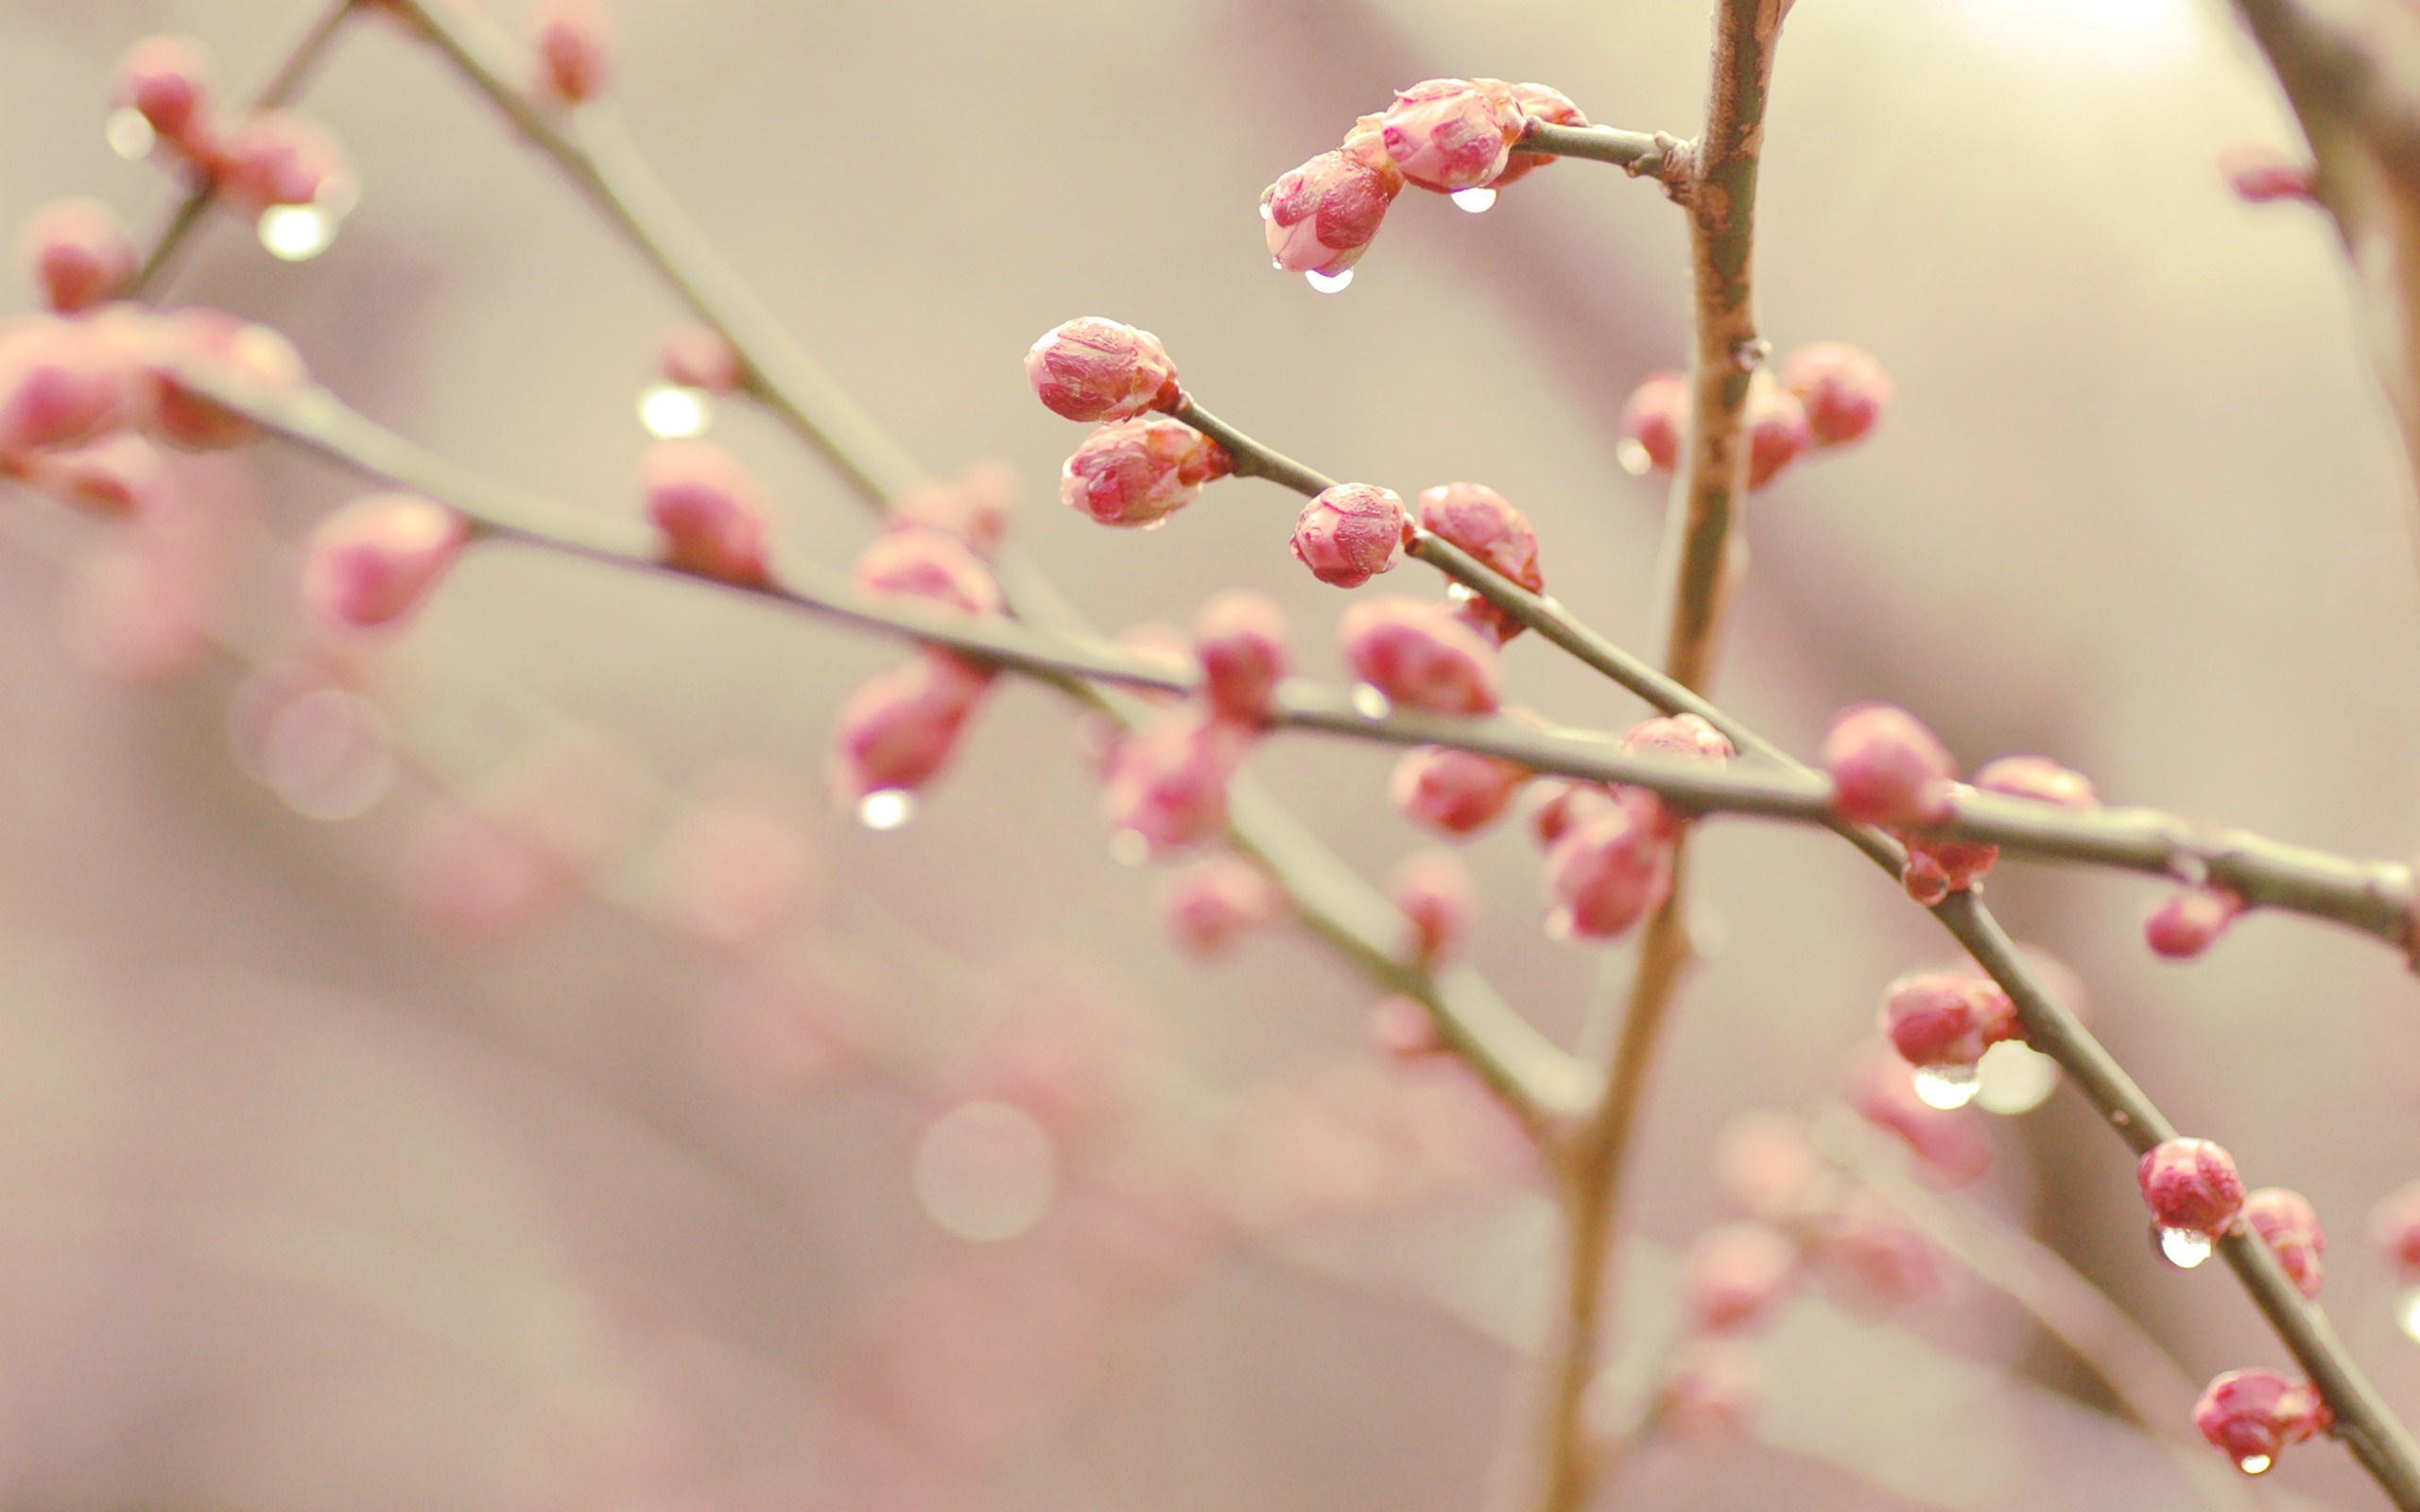 Drops Branches Flowers Spring Nature wallpaper | 2560x1600 | #22803